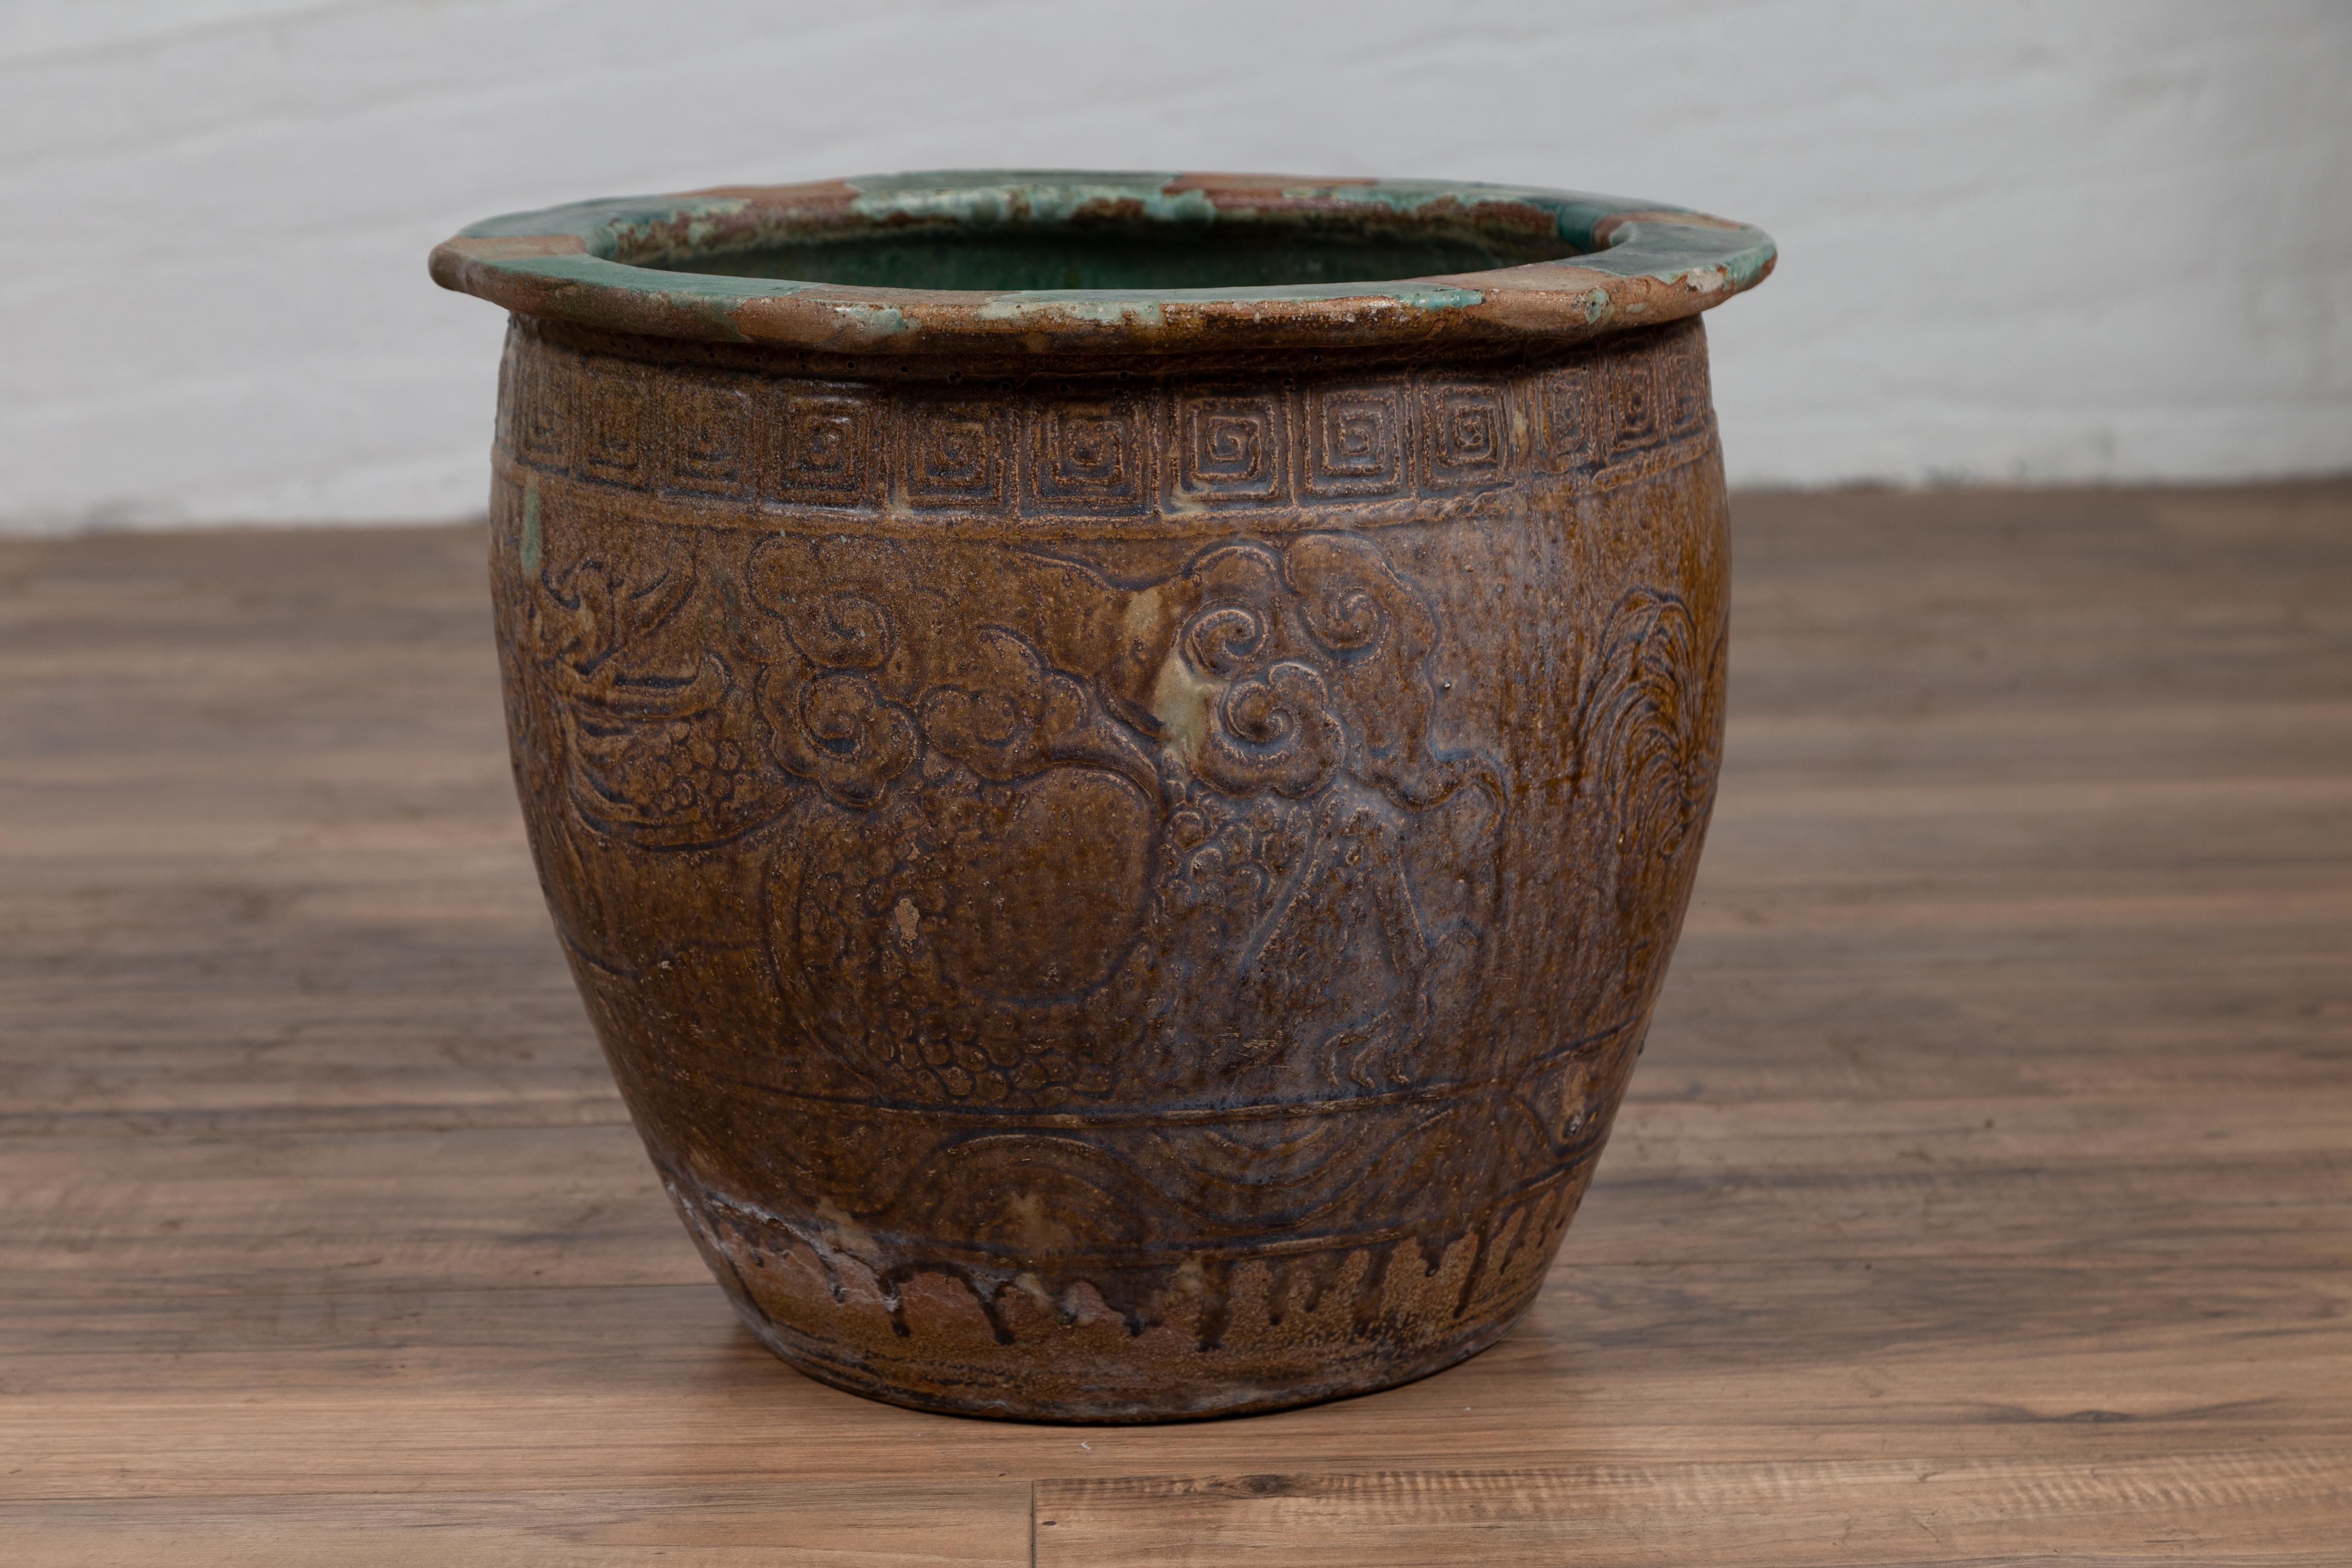 Ceramic Chinese Antique Planter with Weathered Patina, Greek Key, Animals and Clouds